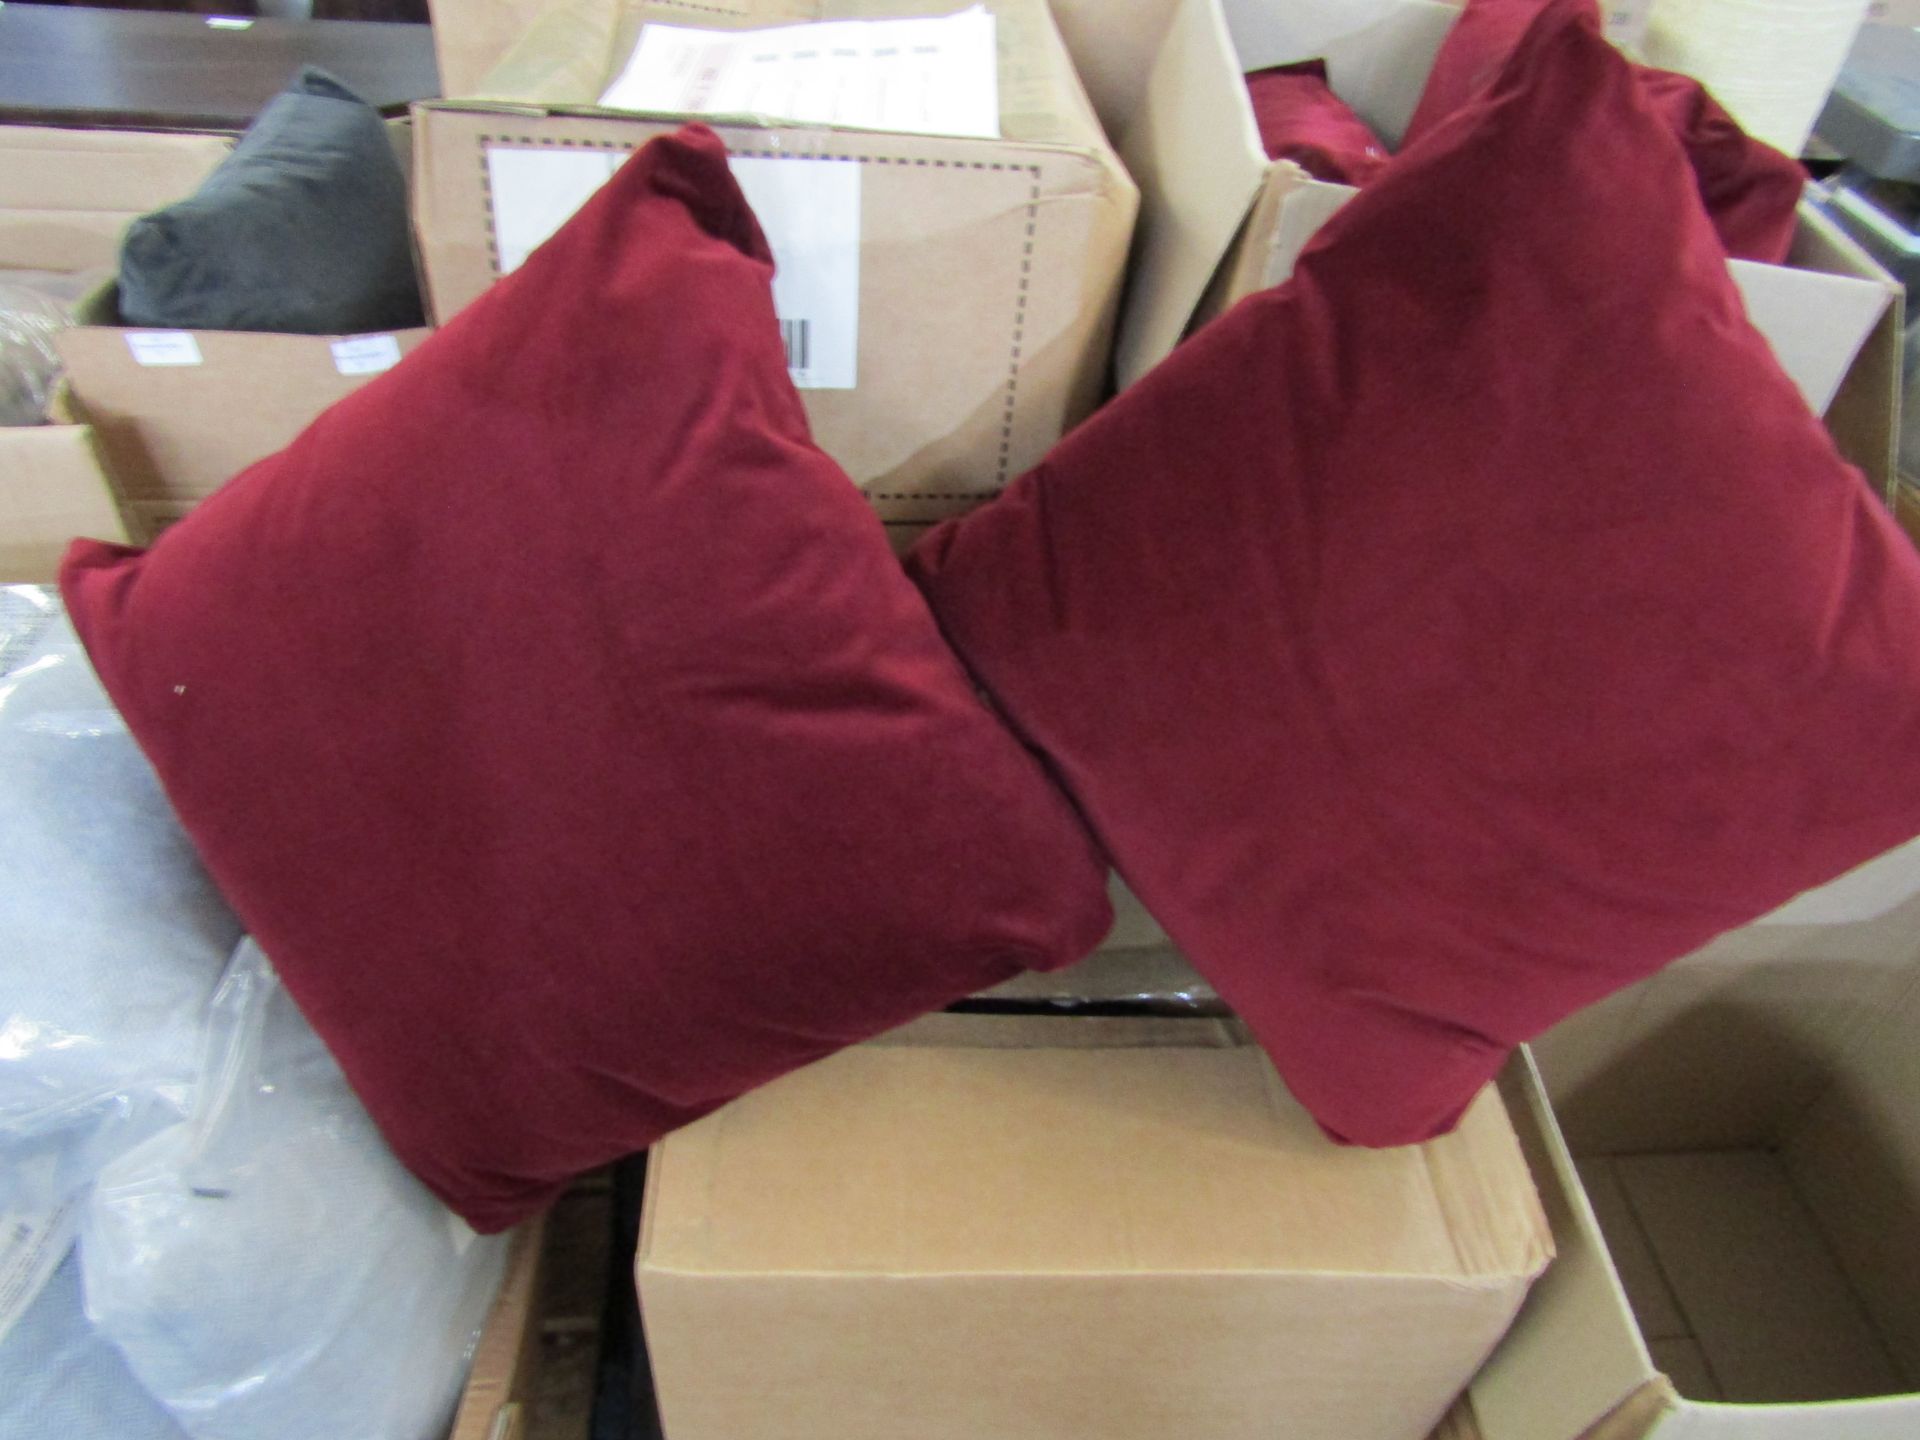 Pair of Currant Scatter Cushions - Vegan Fabric RRP 69